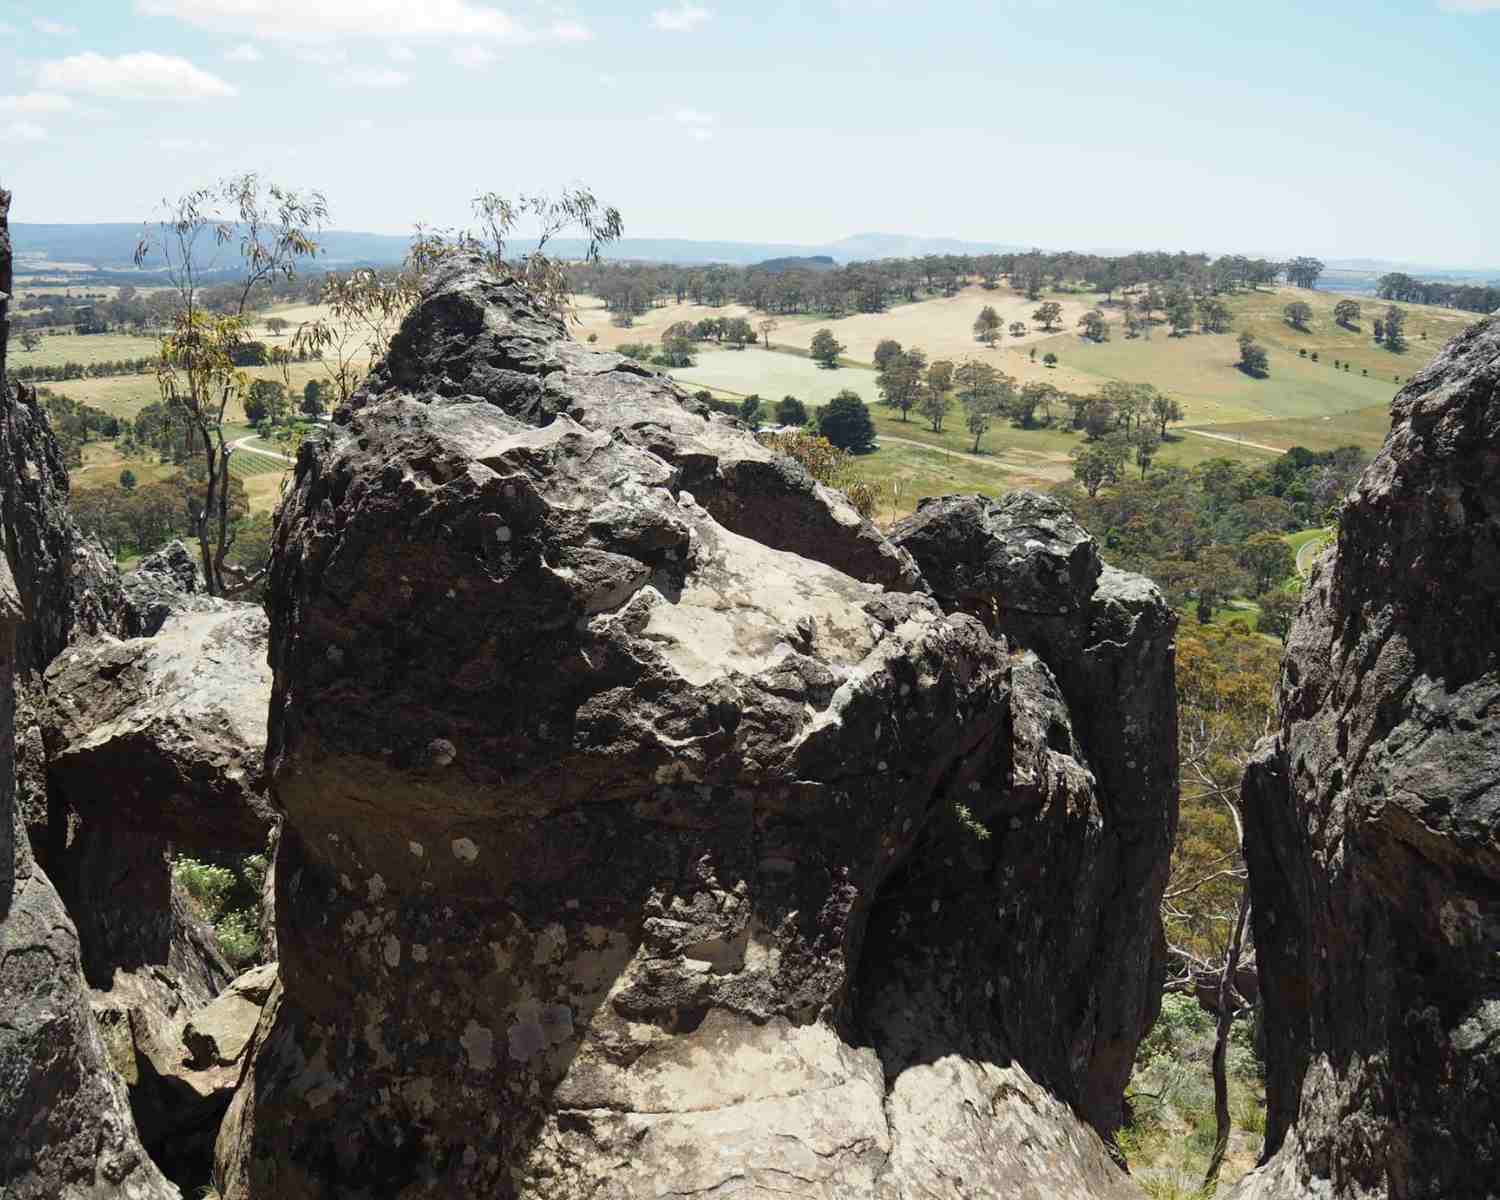 The view from Hanging Rock in Victoria